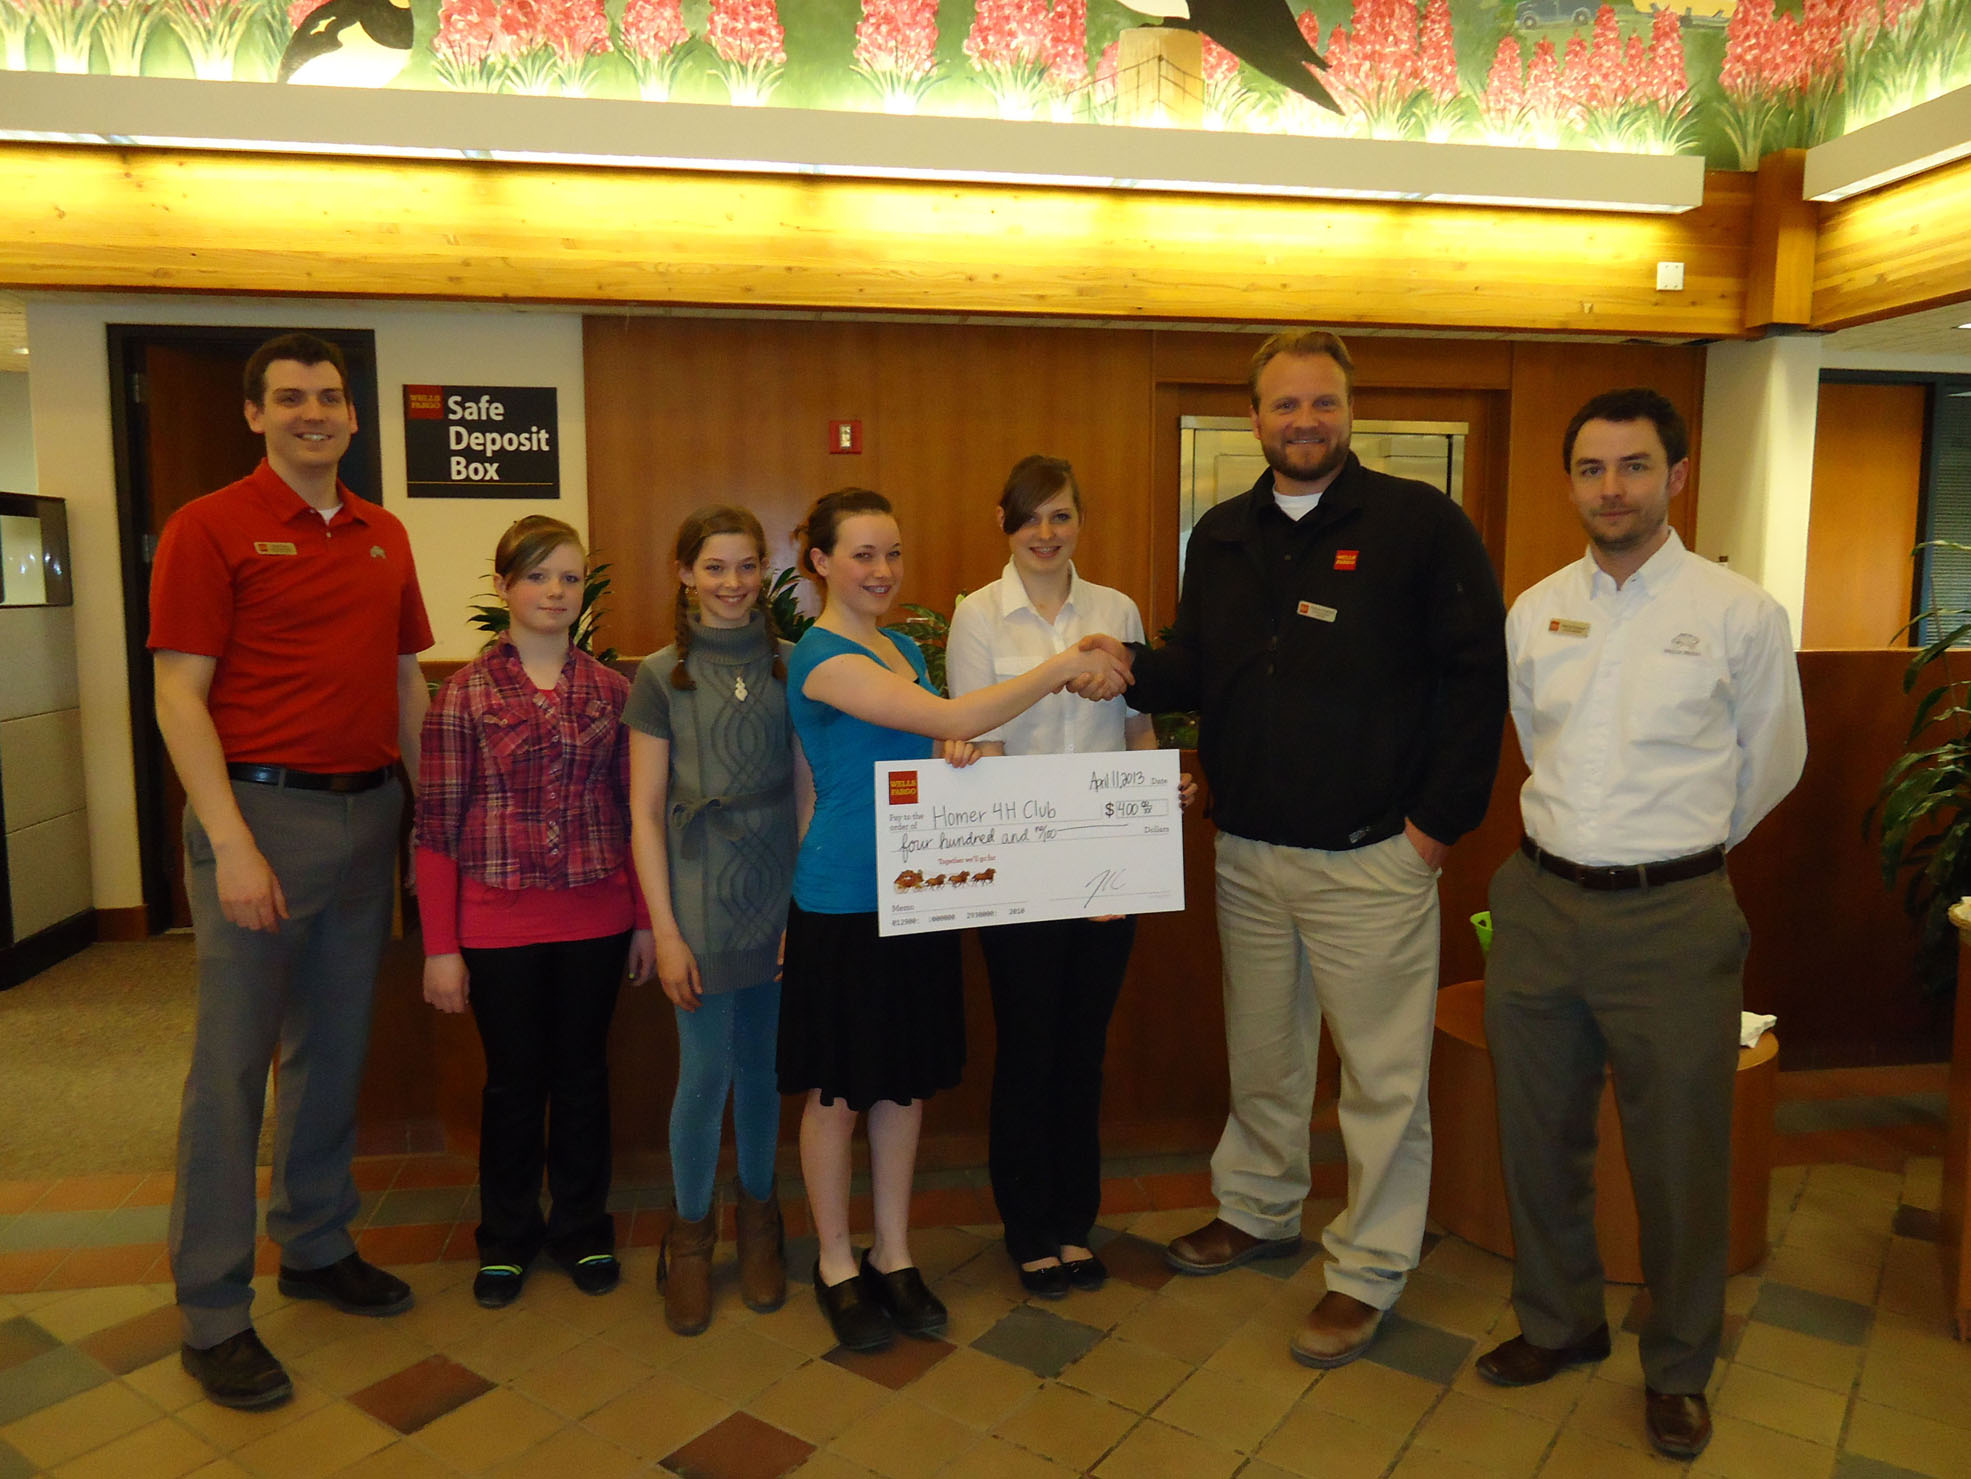 Wells Fargo’s Homer Store Manager Tyler Davis, far left, Business Banking Manager Andy Riddell, second from right, and Kenai Peninsula District Manager Patrick Ryland, far right, present members of the Trailblazer 4-H Club with a check for transportation to the Alaska 4-H Horse Bowl in Fairbanks during an open house April 11 at Wells Fargo. Accepting the check for 4-H are members, from left, Dakota Morris, DeeAnn White, Melanie Mastolier and Melissa Clark. Wells Fargo also presented checks to the Homer Council on the Arts, South Peninsula Haven House and the Kenai Peninsula Food Bank.-Photo Provided